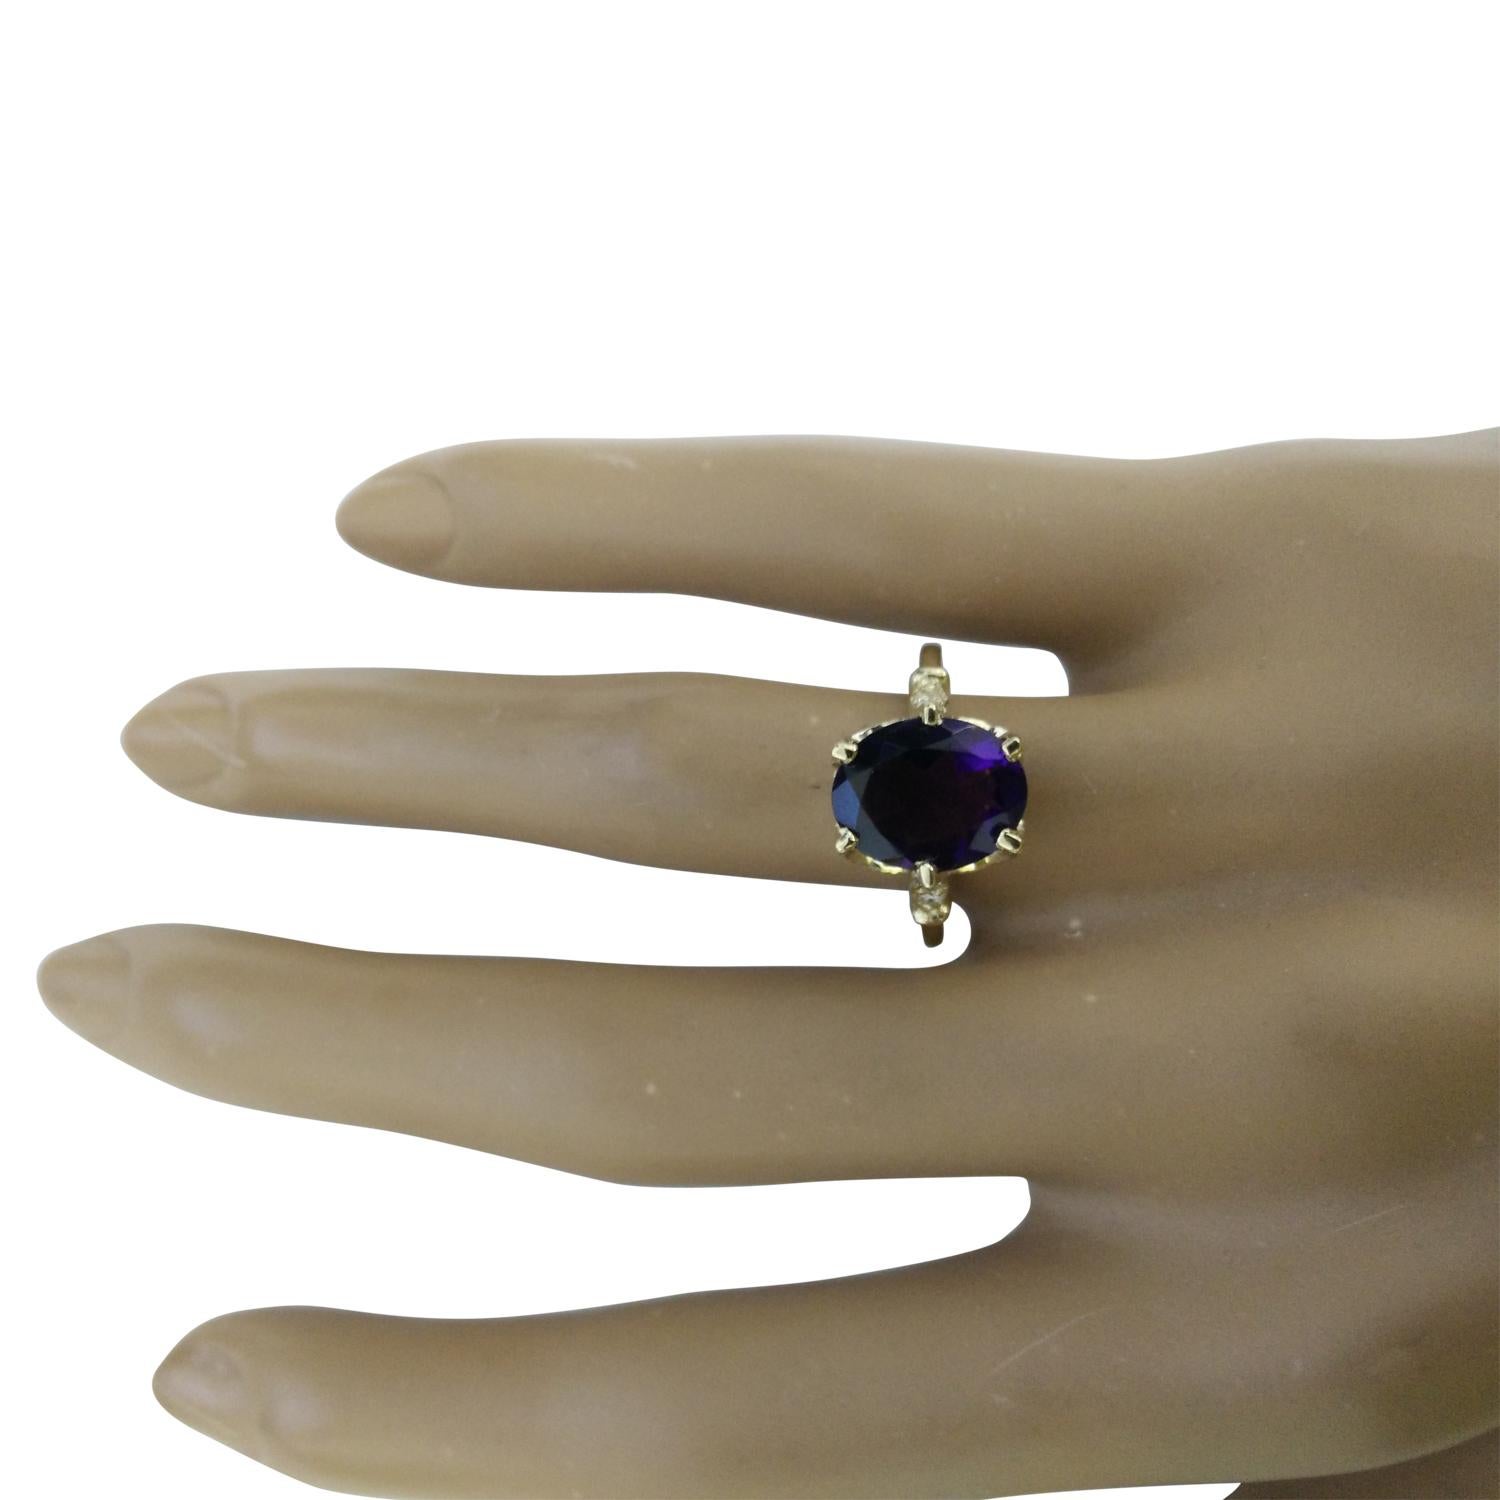 3.41 Carat Natural Amethyst 14 Karat Solid Yellow Gold Diamond Ring
Stamped: 14K 
Total Ring Weight: 4.2 Grams 
Amethyst Weight: 3.26 Carat (11.00x9.00 Millimeters)  
Diamond Weight: 0.15 Carat (F-G Color, VS2-SI1 Clarity )
Quantity: 4
Face